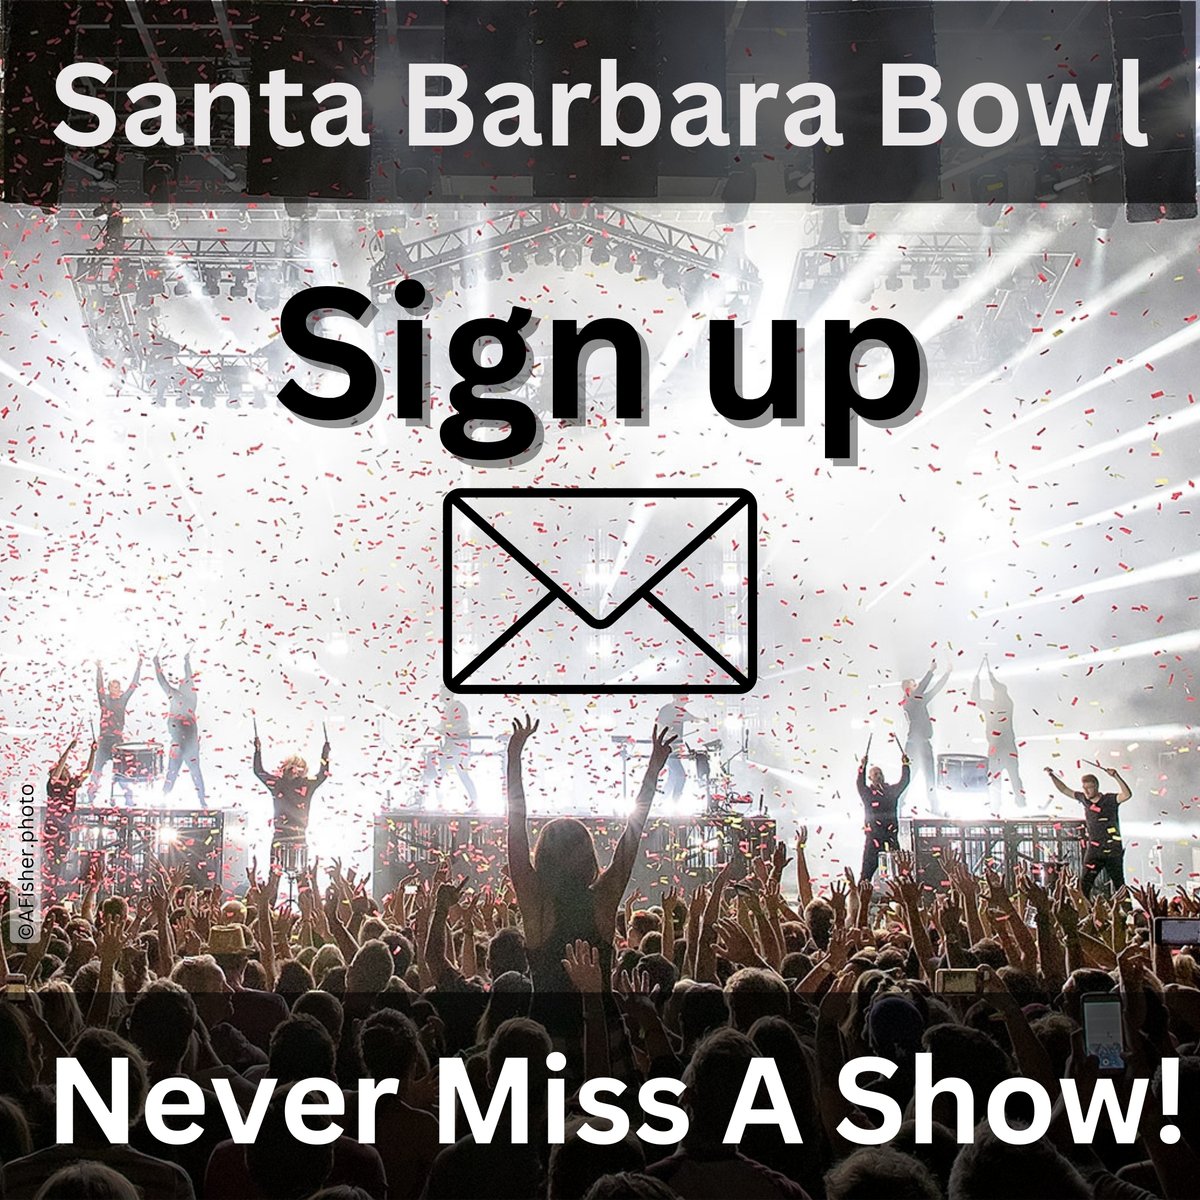 🎶 Never miss a @sbbowl show! 📣Sign up and stay up to date with Bowl concert announcements, artist updates, and presale opportunities, all delivered straight to your inbox! ⭐Subscribe: sbbowl.com/subscribe #sbbowl #sbbowlsubscribe #emailsignup #sbbowlannouncements